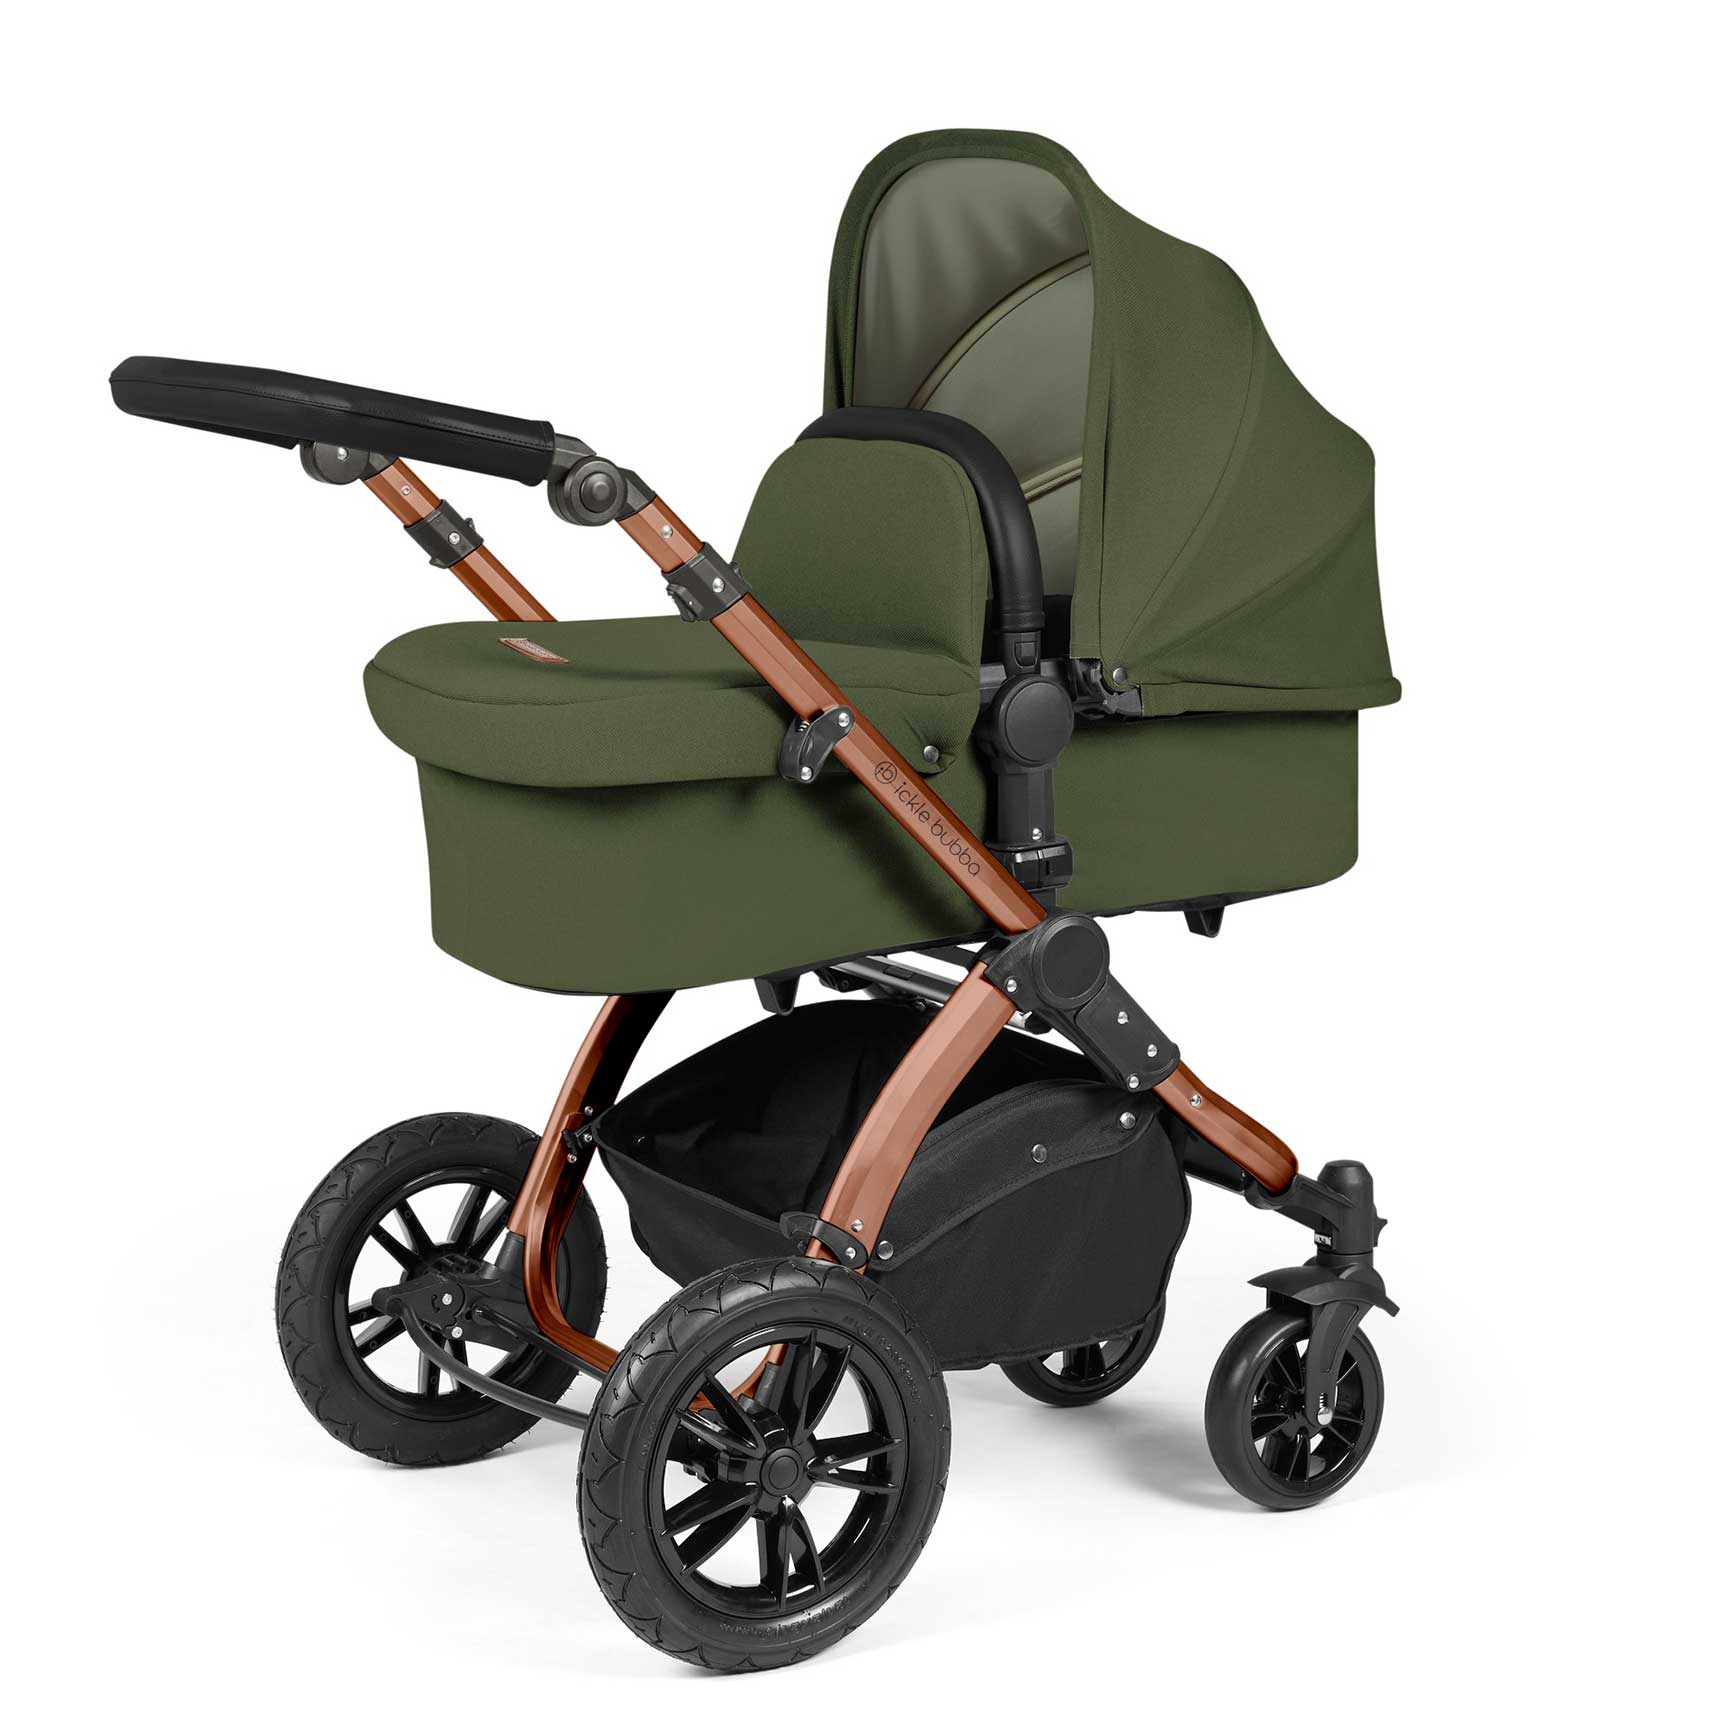 Ickle Bubba Stomp Luxe All-in-One Travel System with Isofix Base in Black/Woodland/Black Travel Systems 10-011-300-138 5056515026511